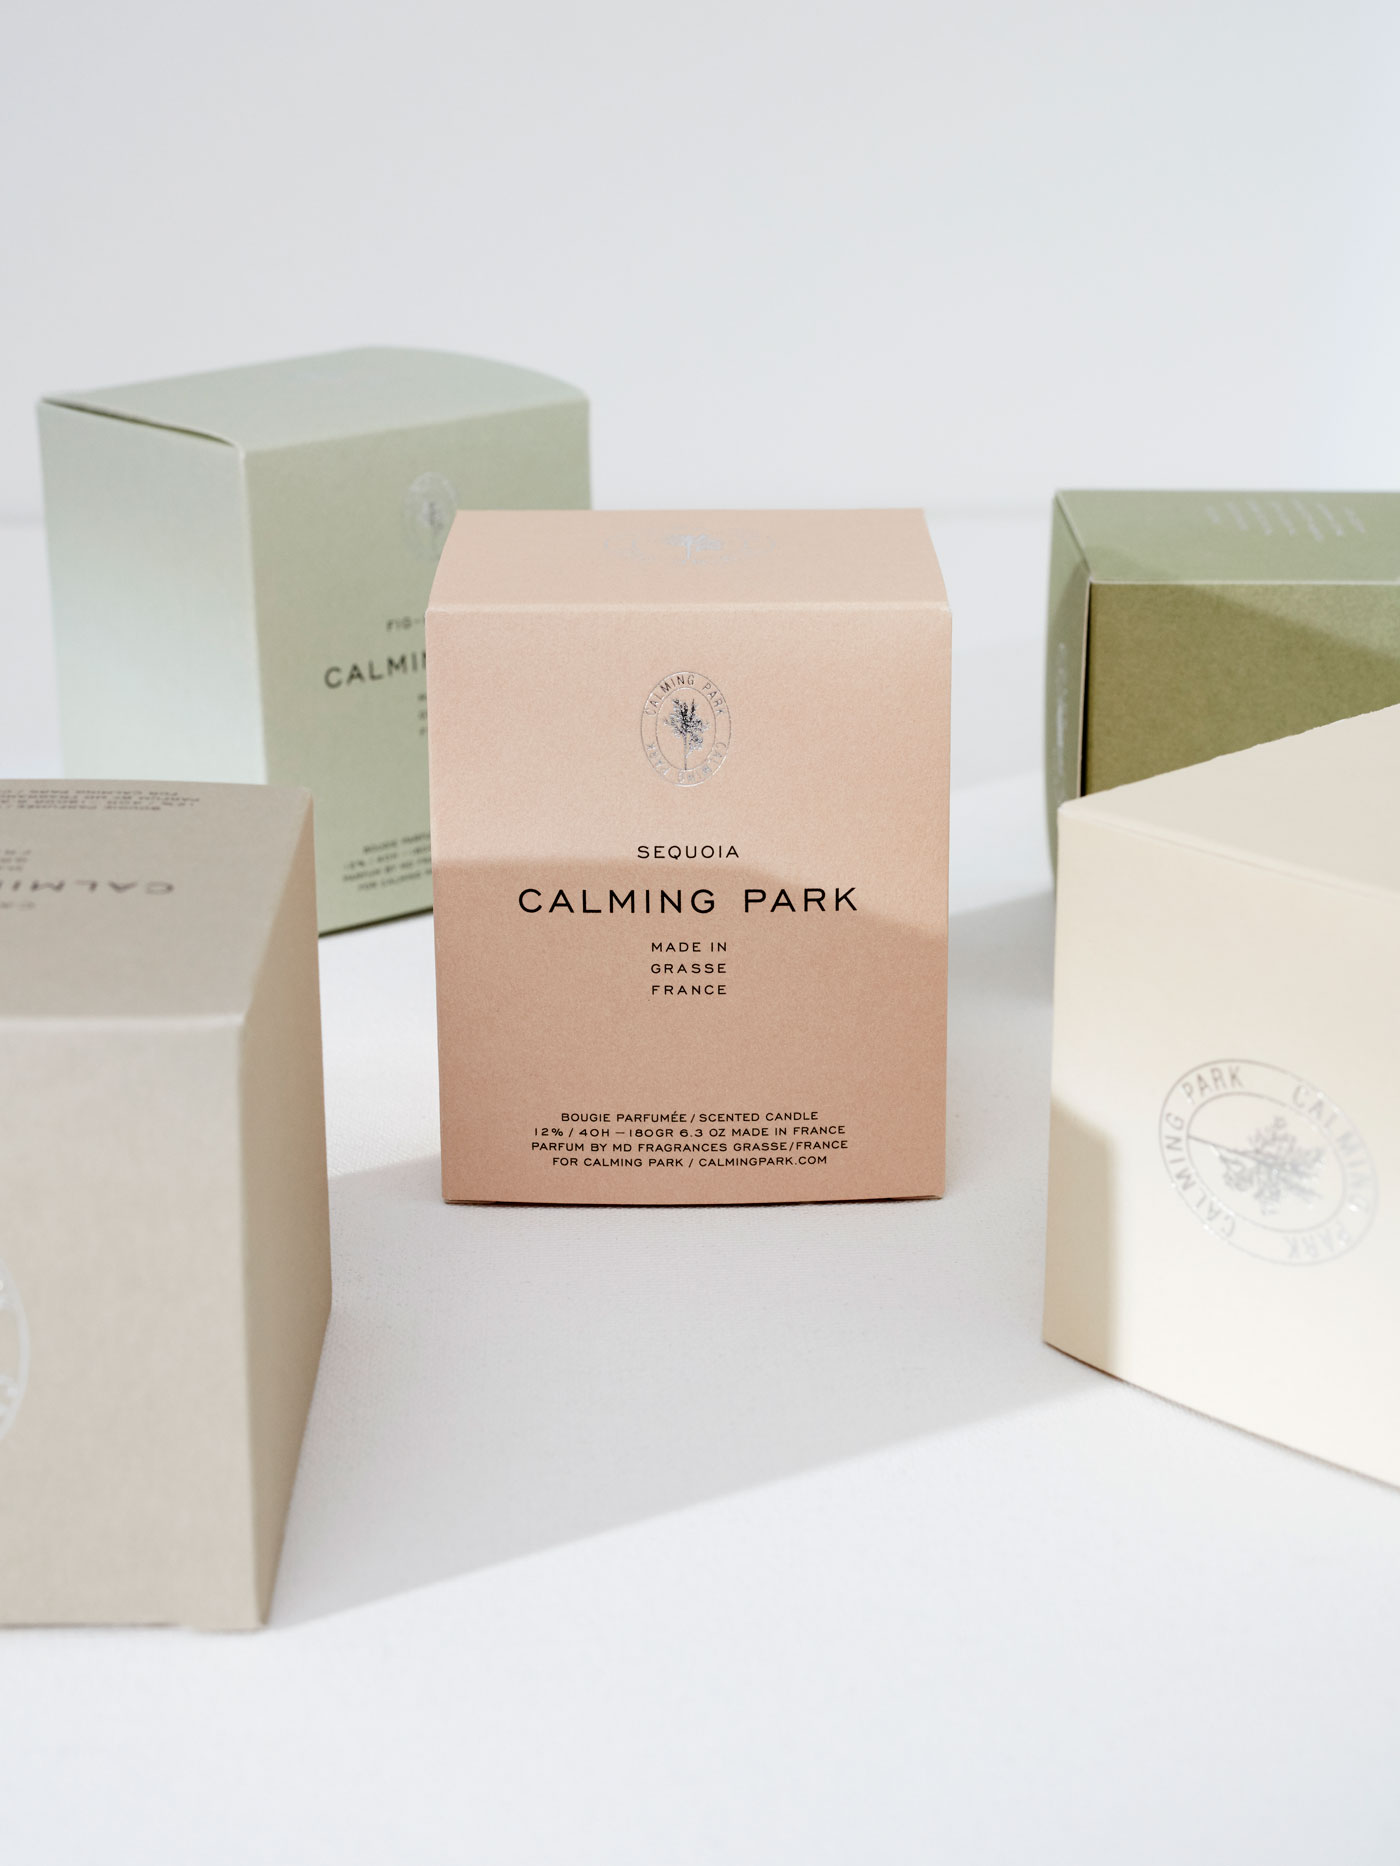 Calming Park – Scented candle collection